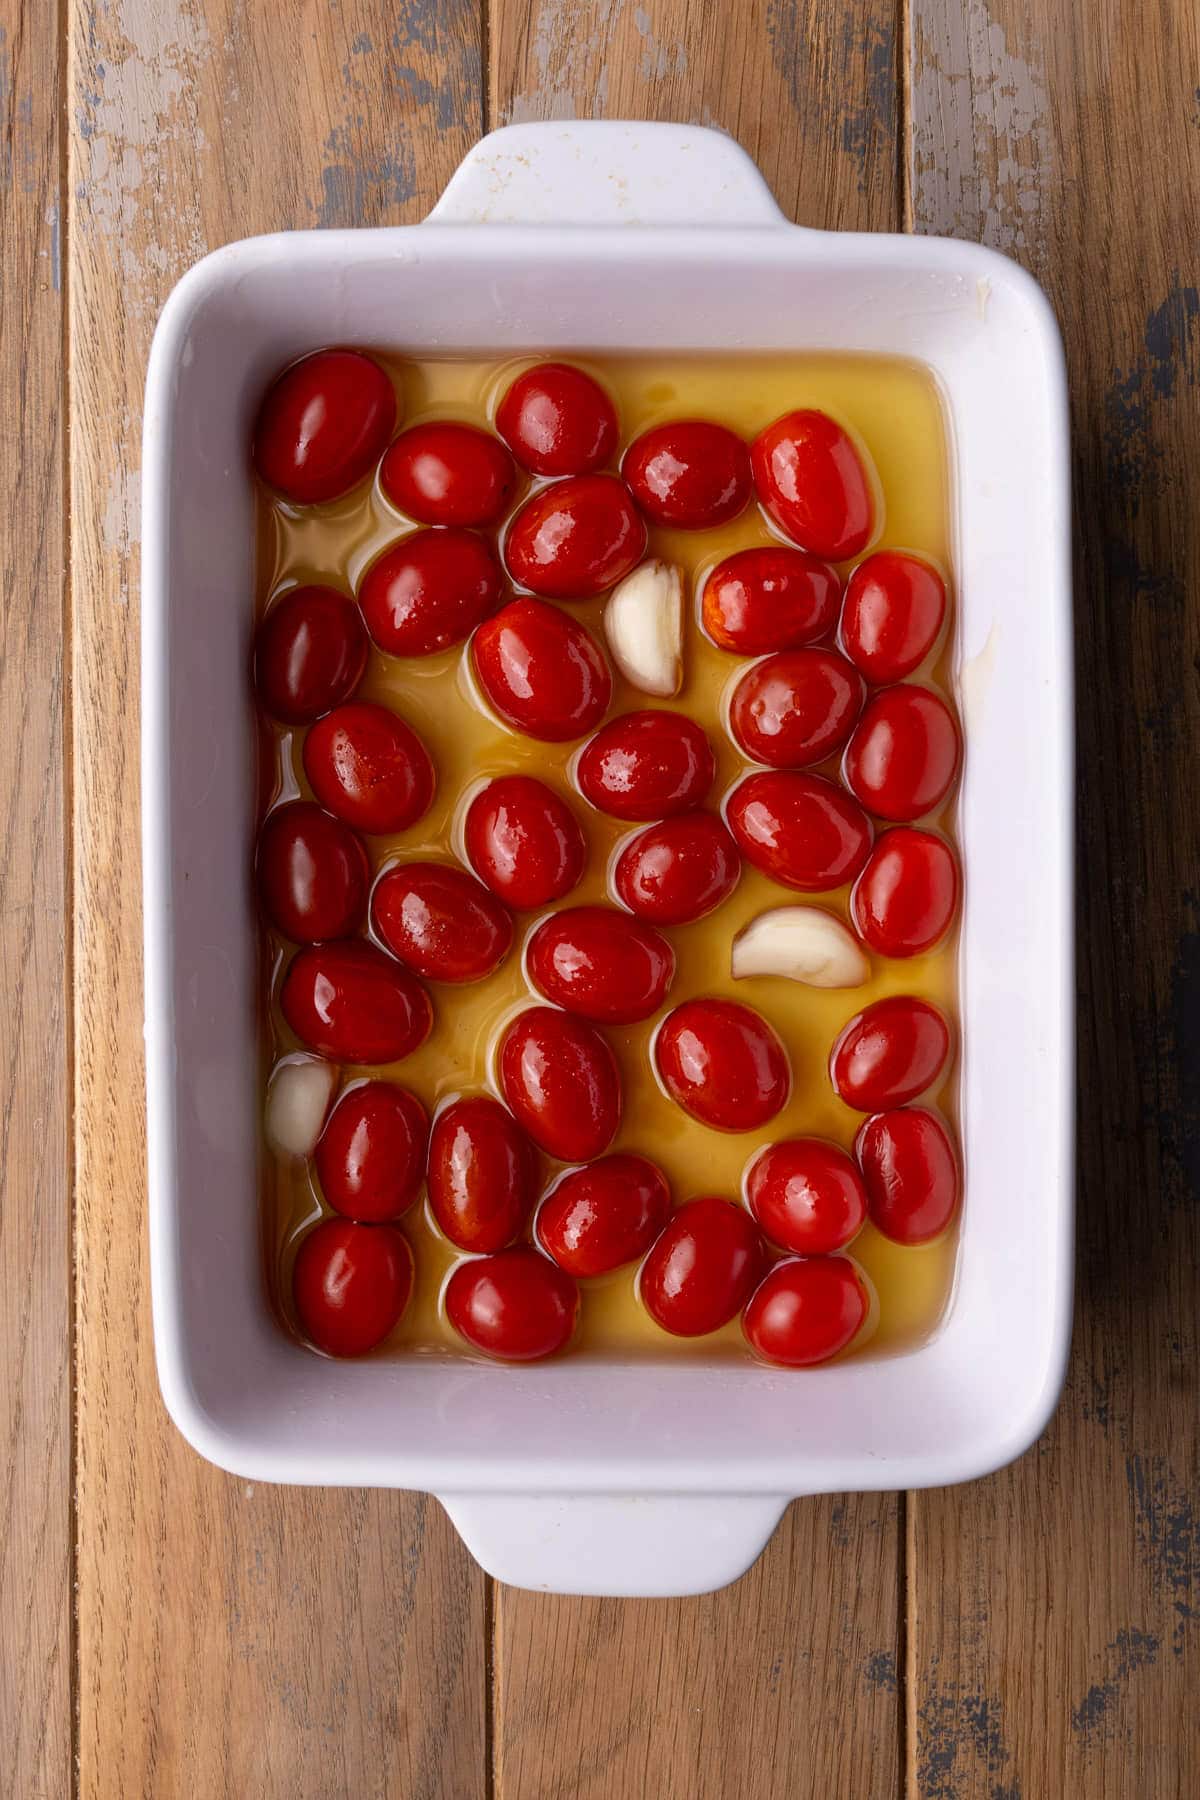 Grape tomatoes and garlic cloves submerged in olive oil with honey and salt. 